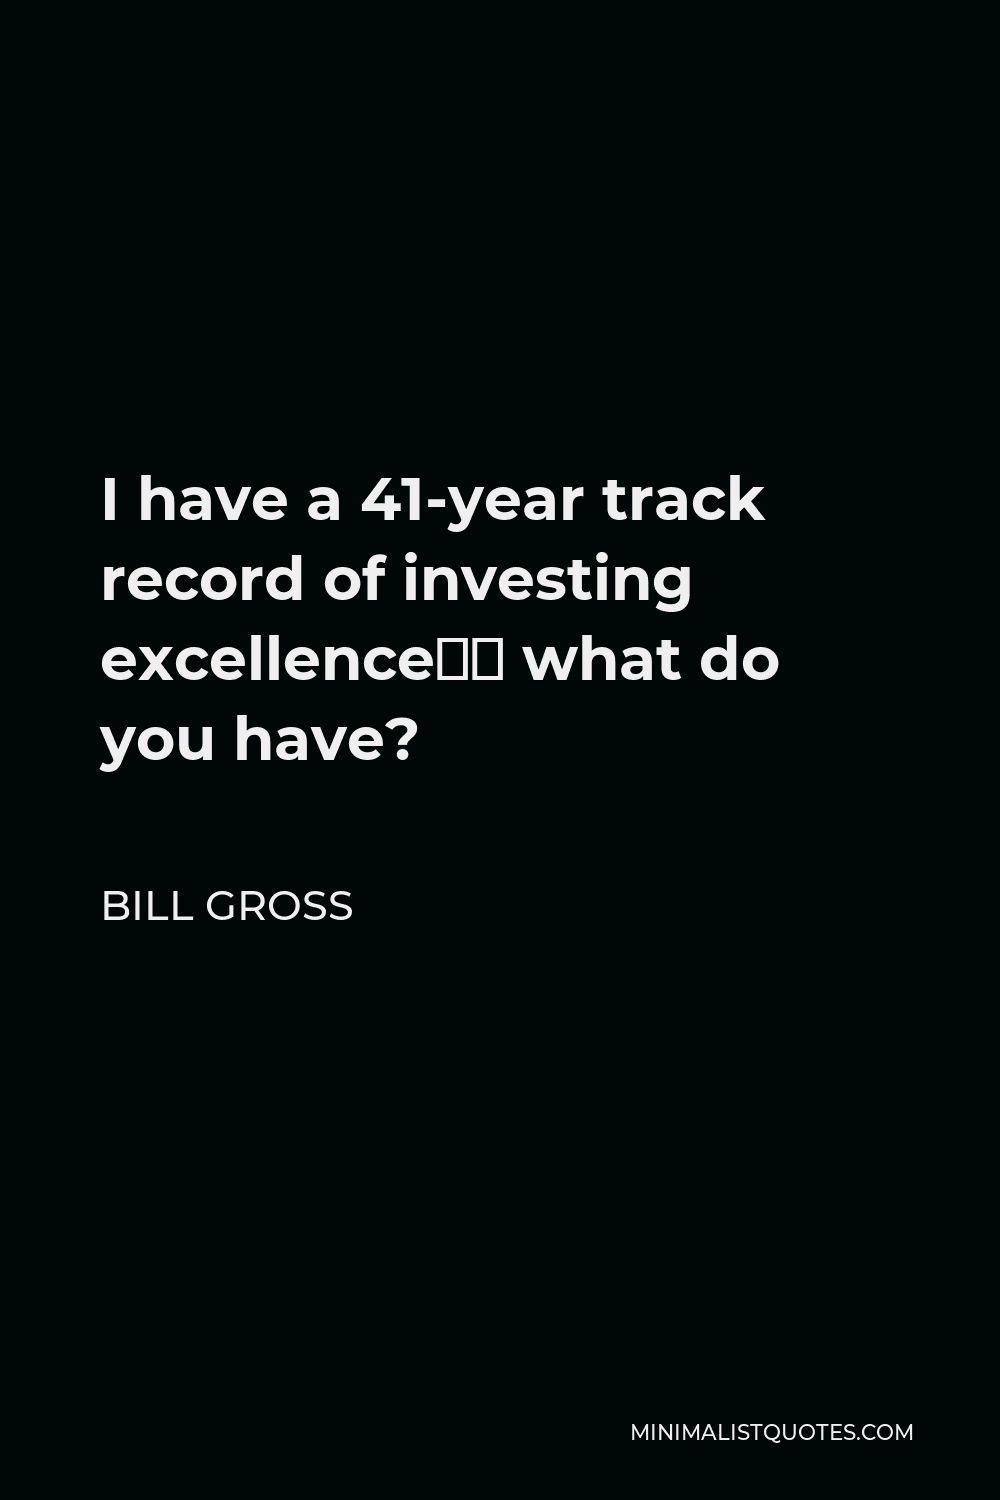 Bill Gross Quote - I have a 41-year track record of investing excellence… what do you have?